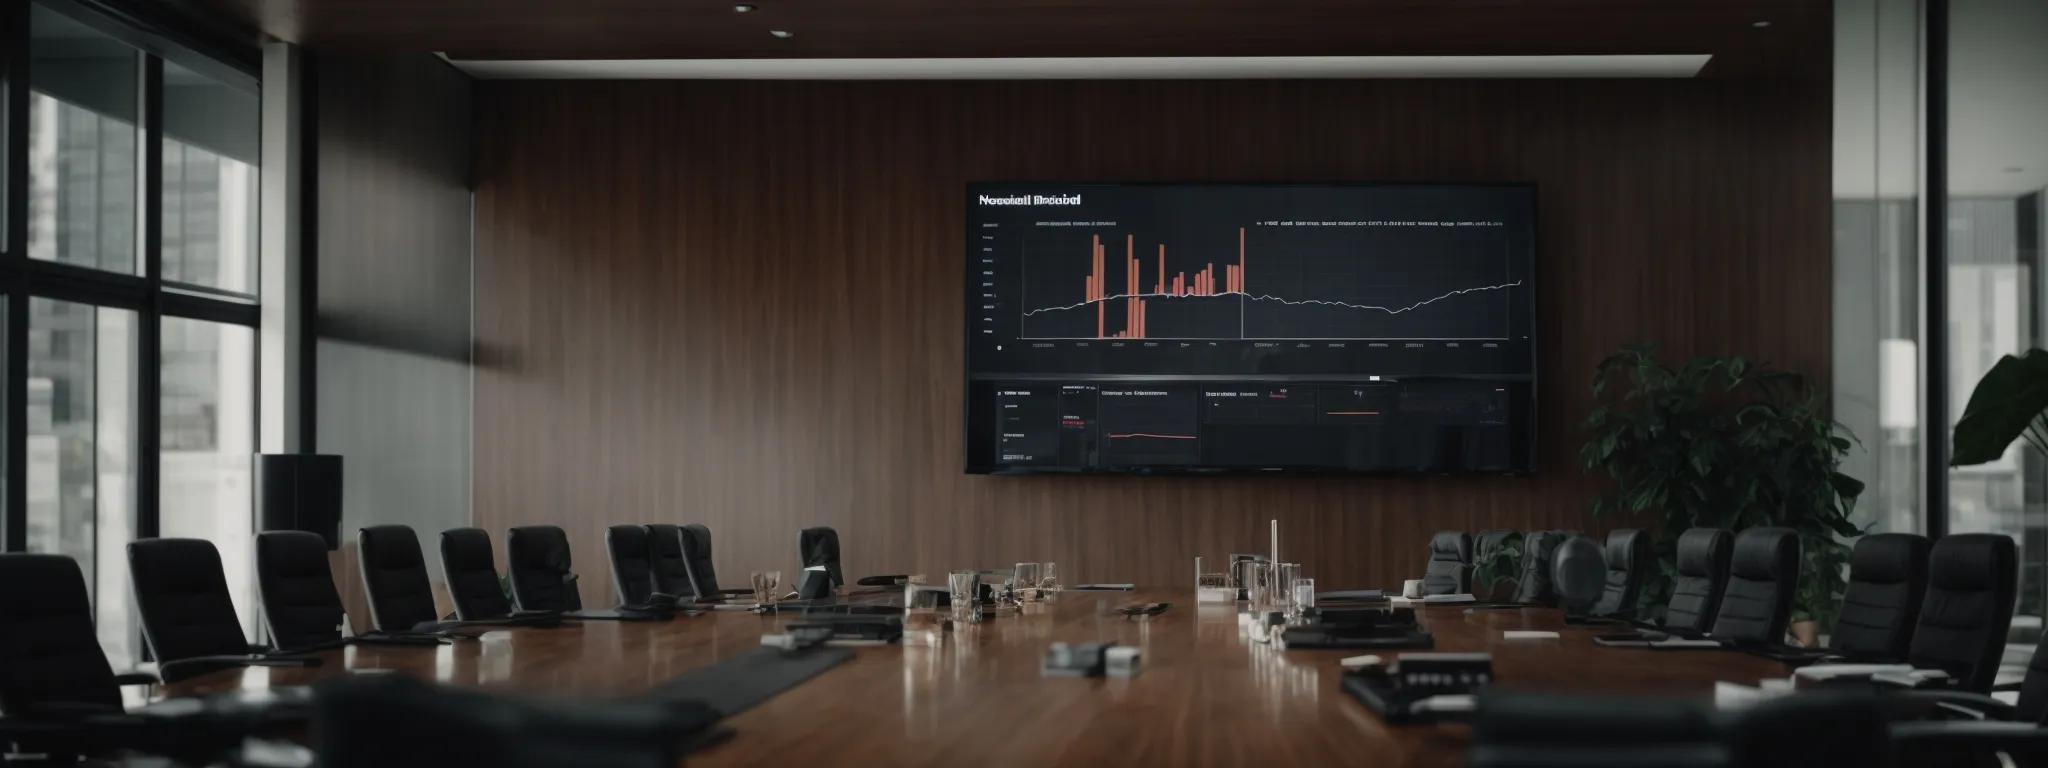 a boardroom with a large screen displaying a graph showing upward growth trends.